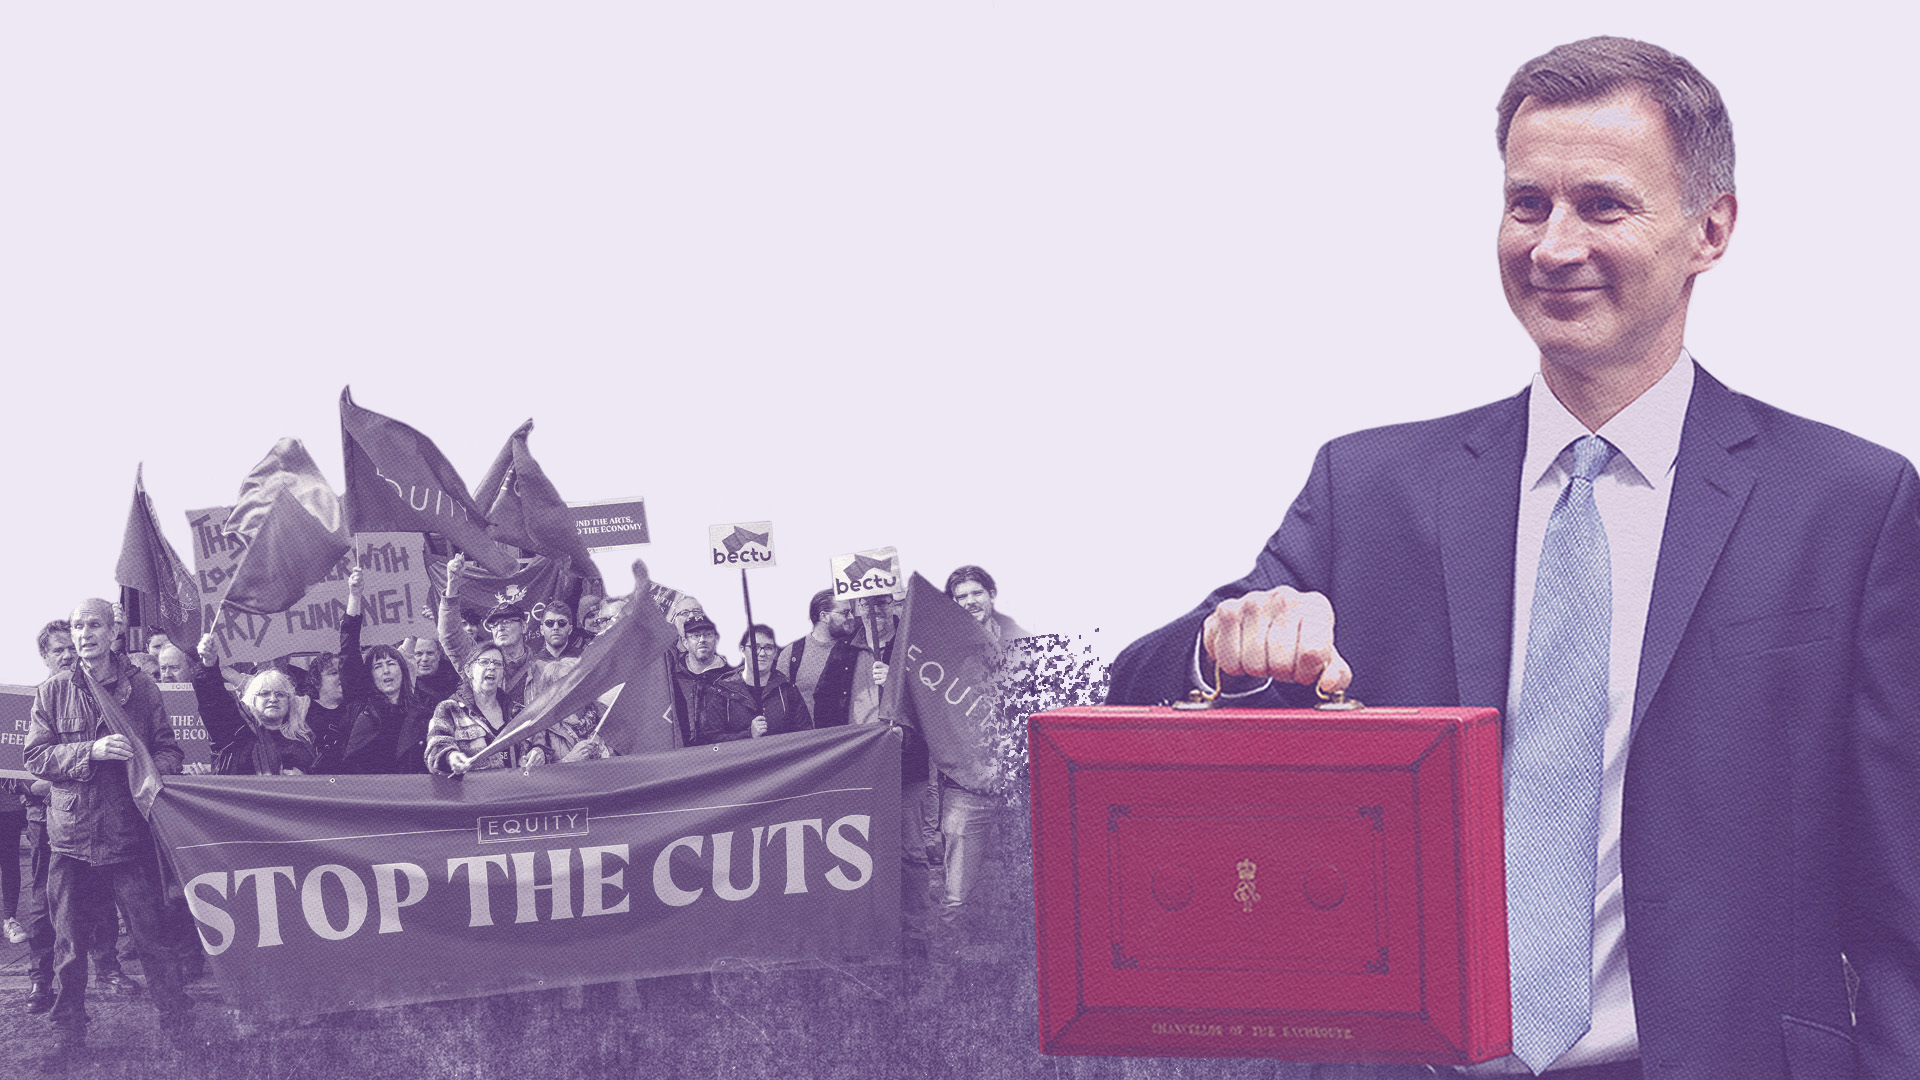 Jeremy Hunt holds a red briefcase next to an Equity banner with a purple overlay